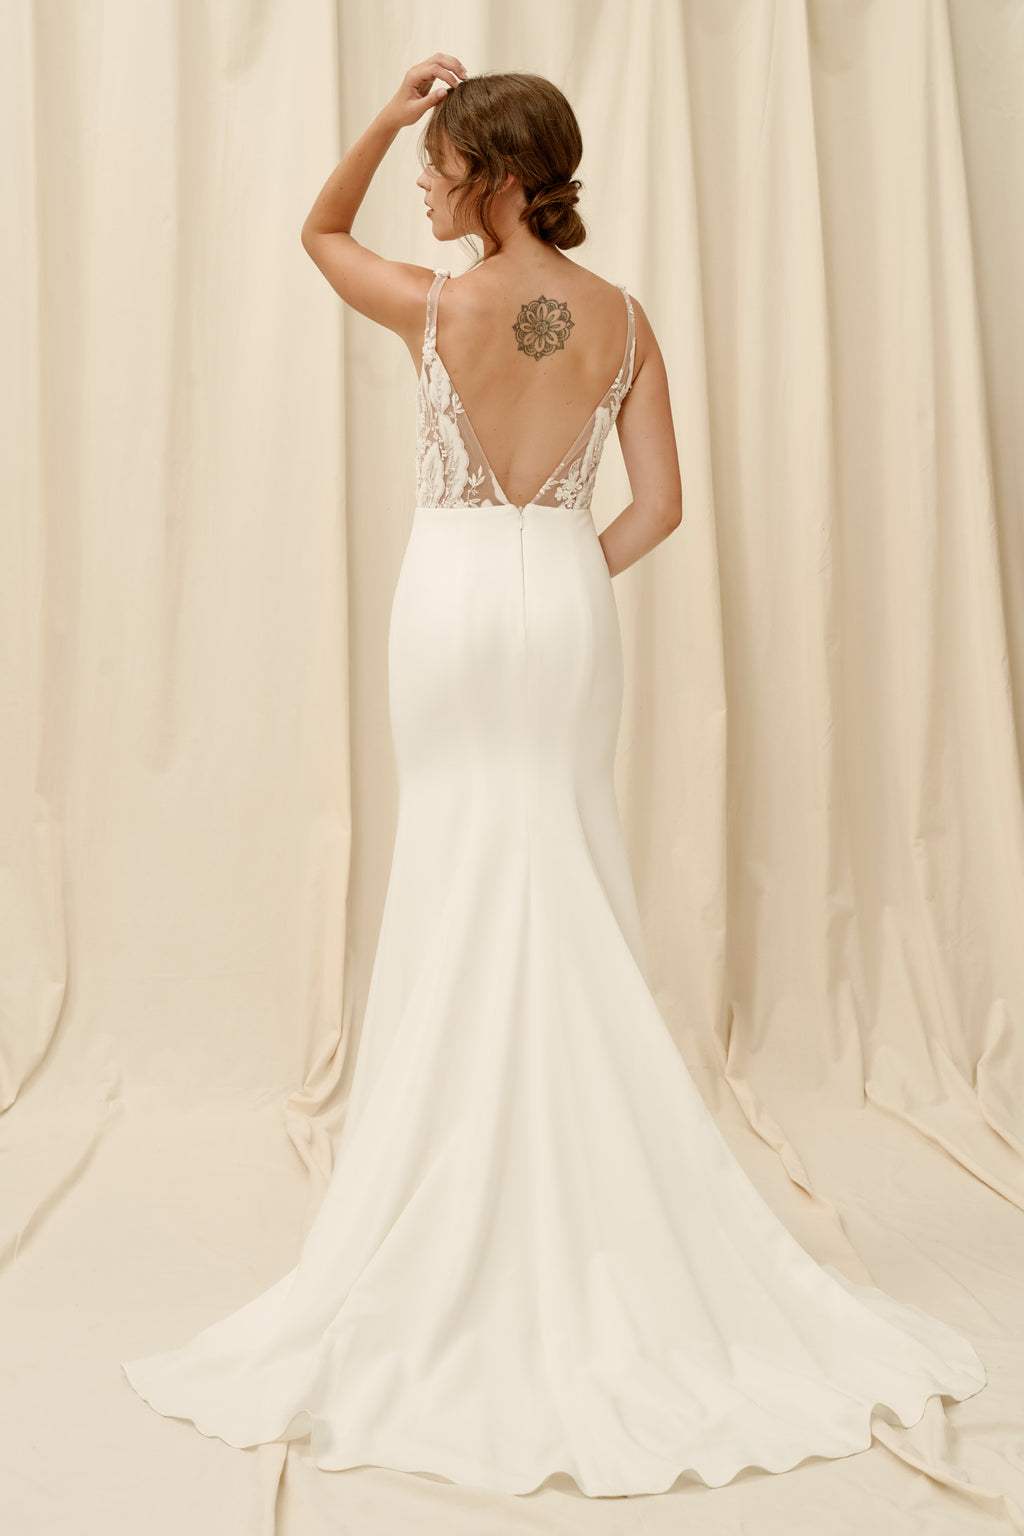 Backless mermaid wedding dress with crepe skirt and lace top